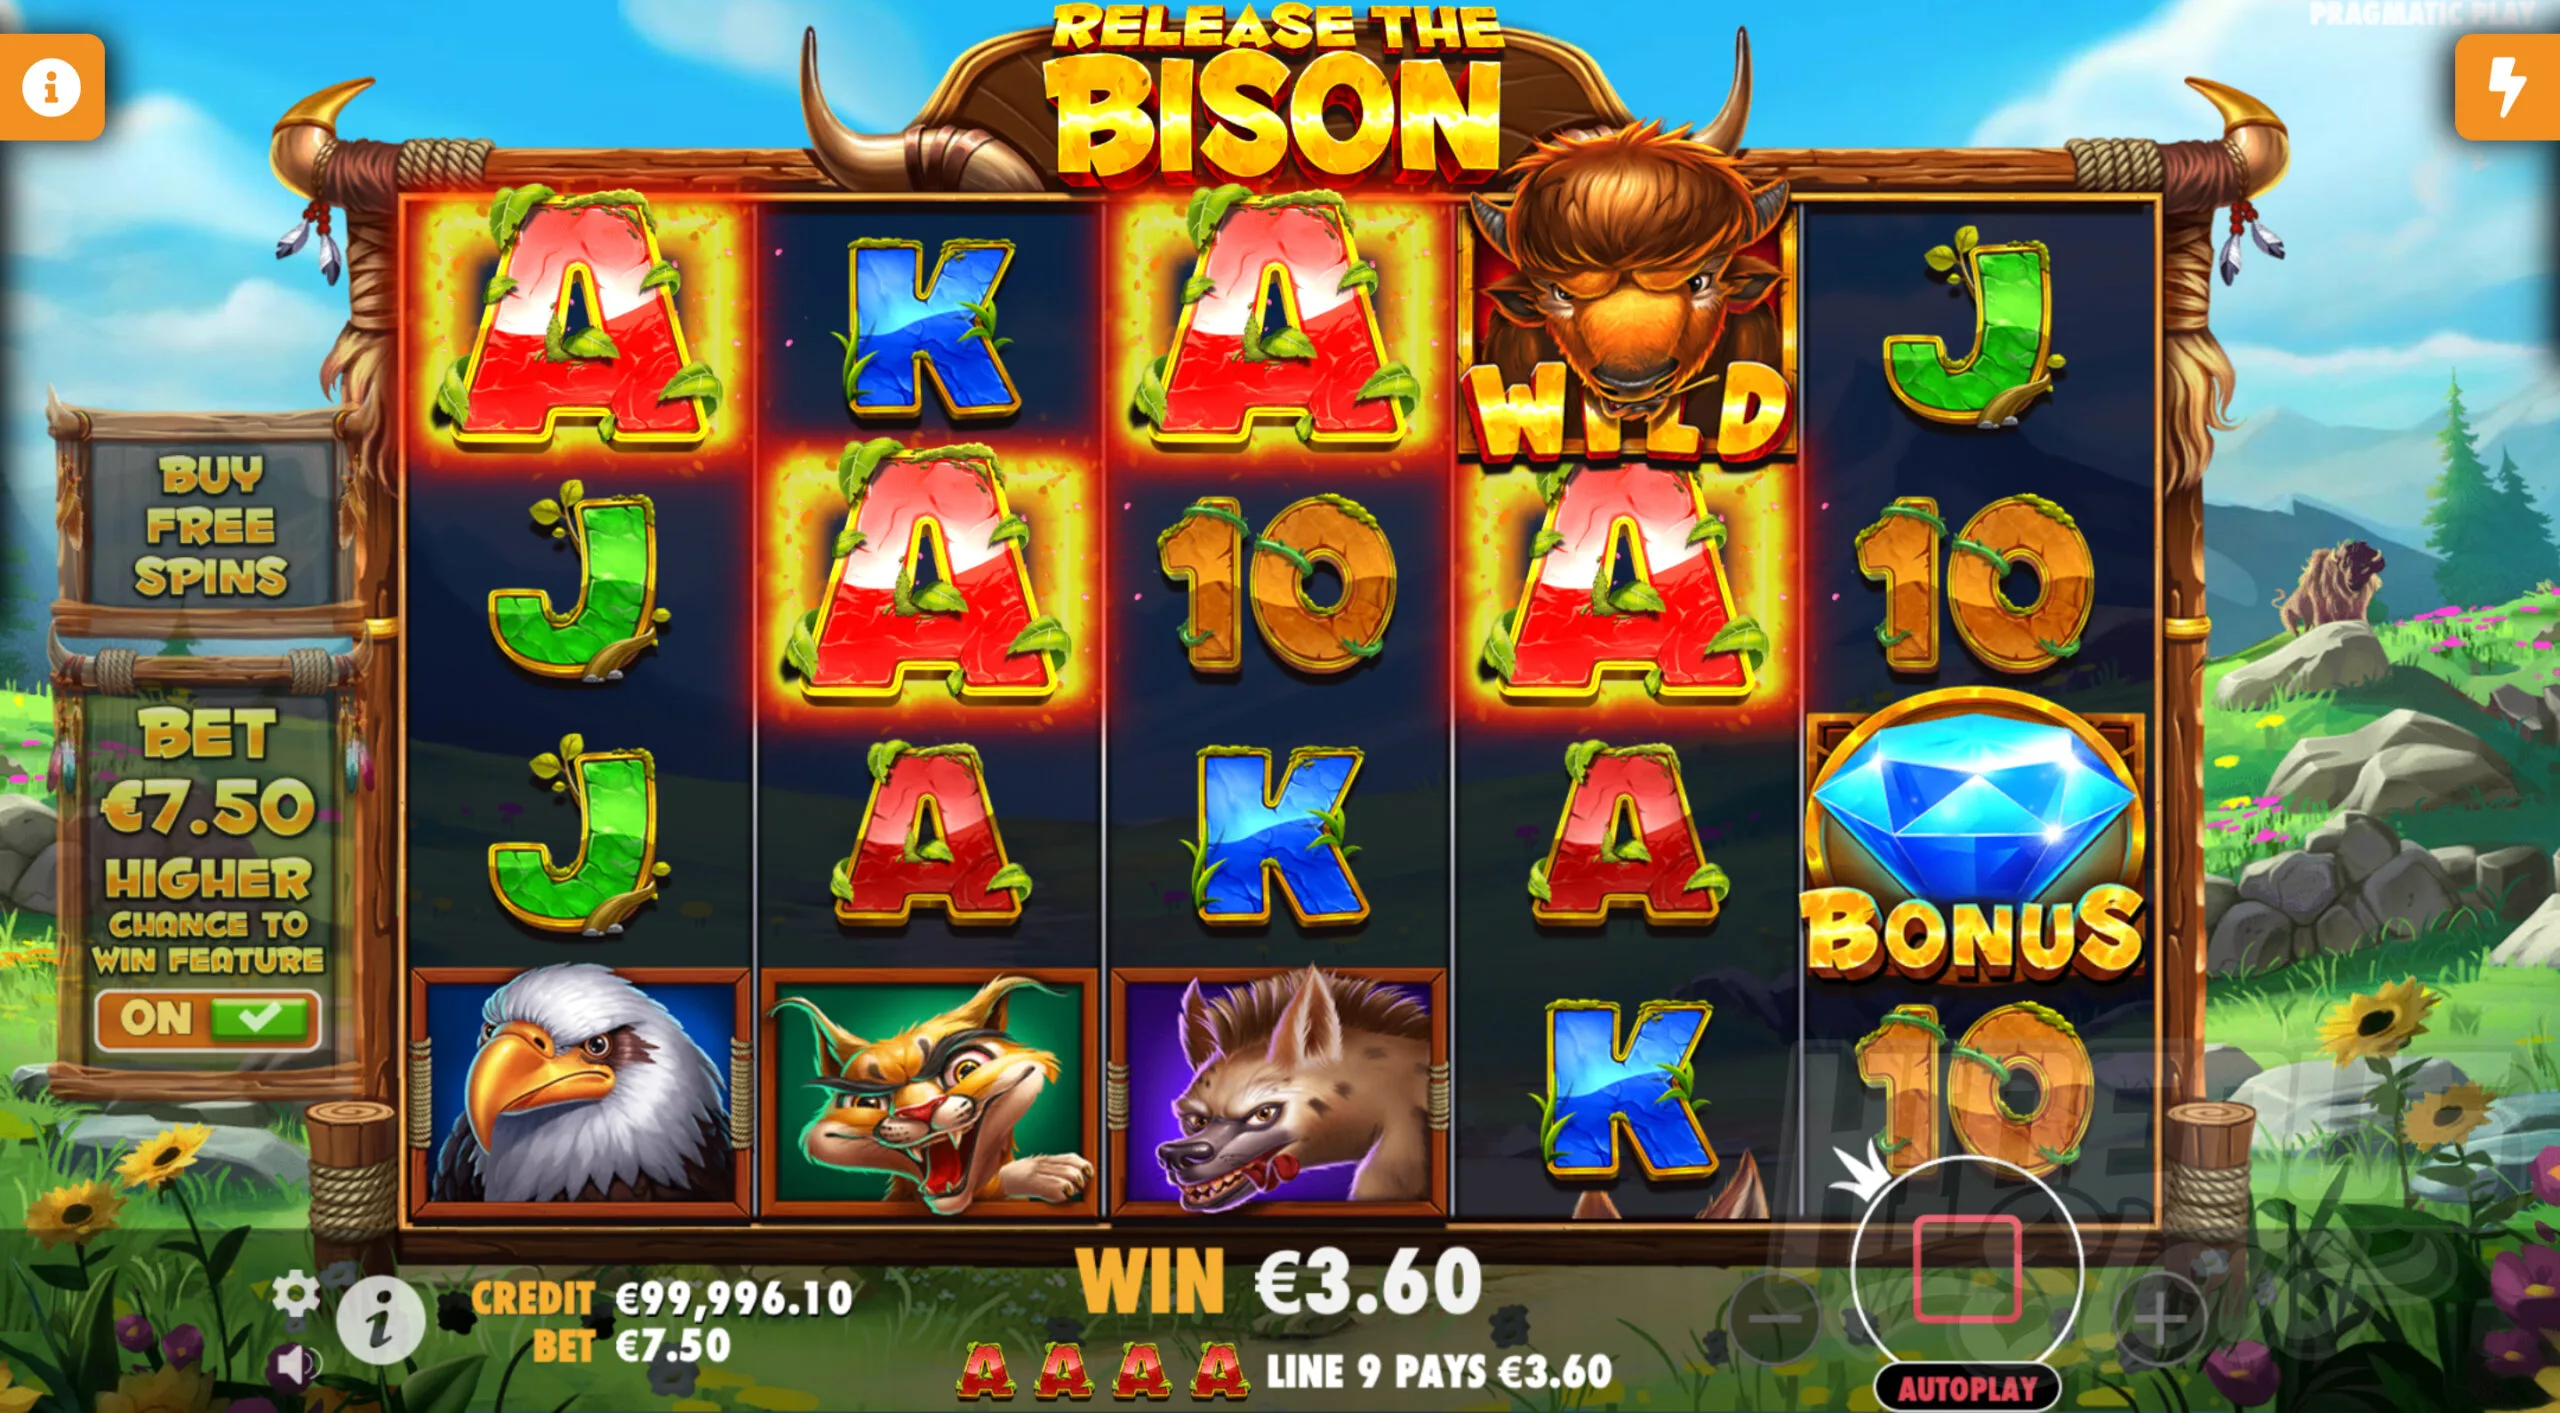 Release the Bison Offers Players 20 Fixed Win Lines